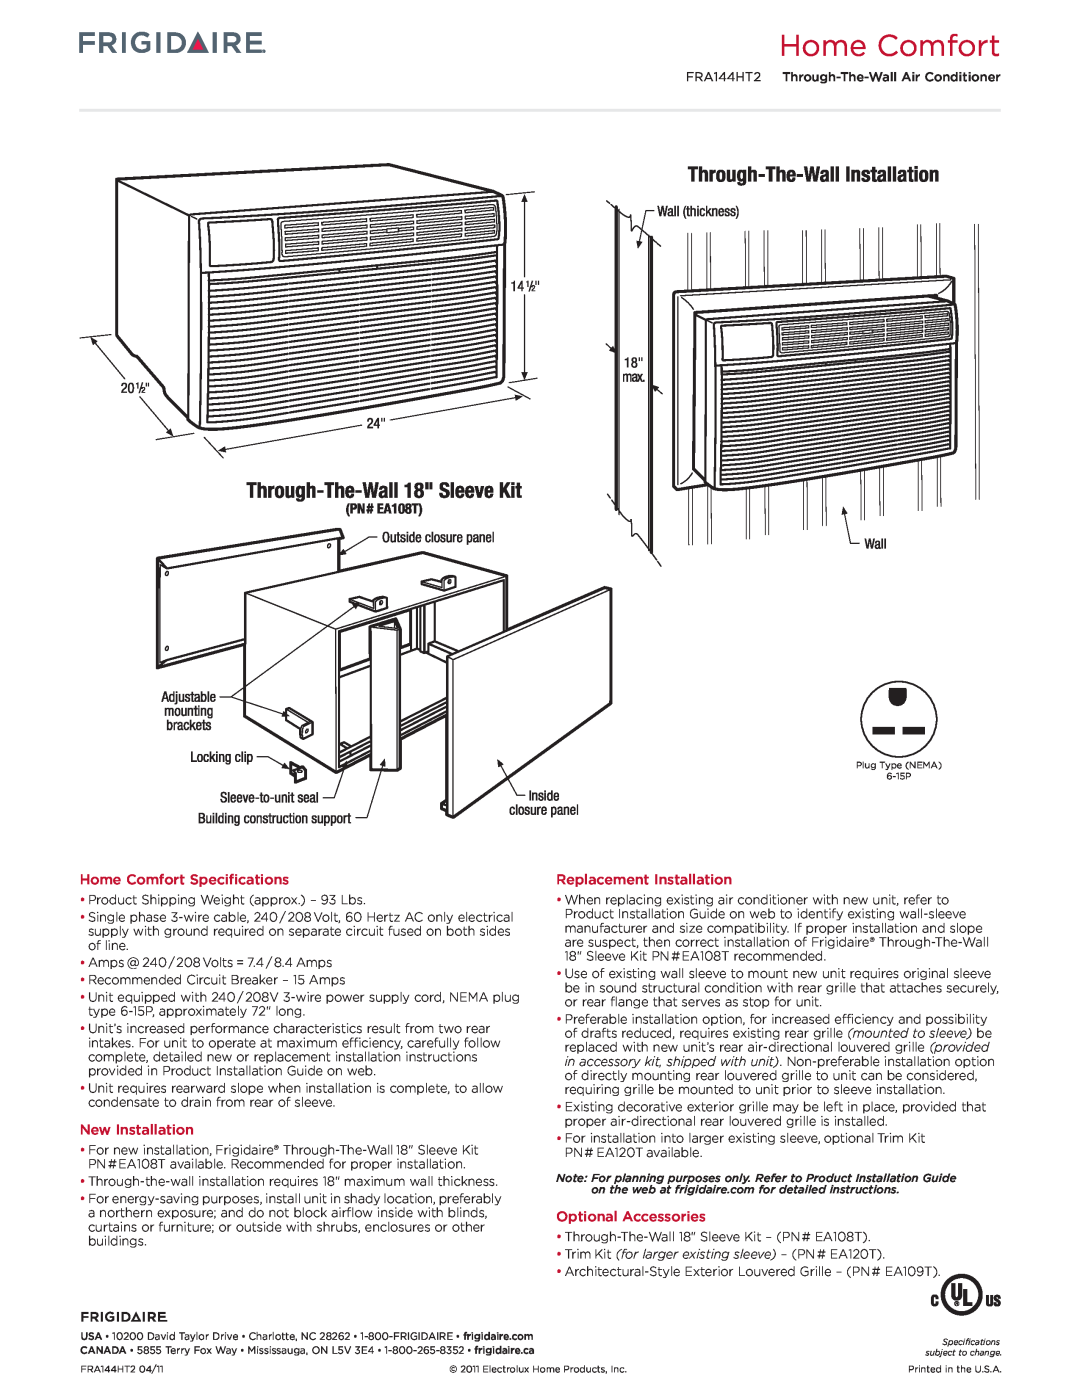 Frigidaire FRA144HT2 Home Comfort Specifications, New Installation, Replacement Installation, Optional Accessories 